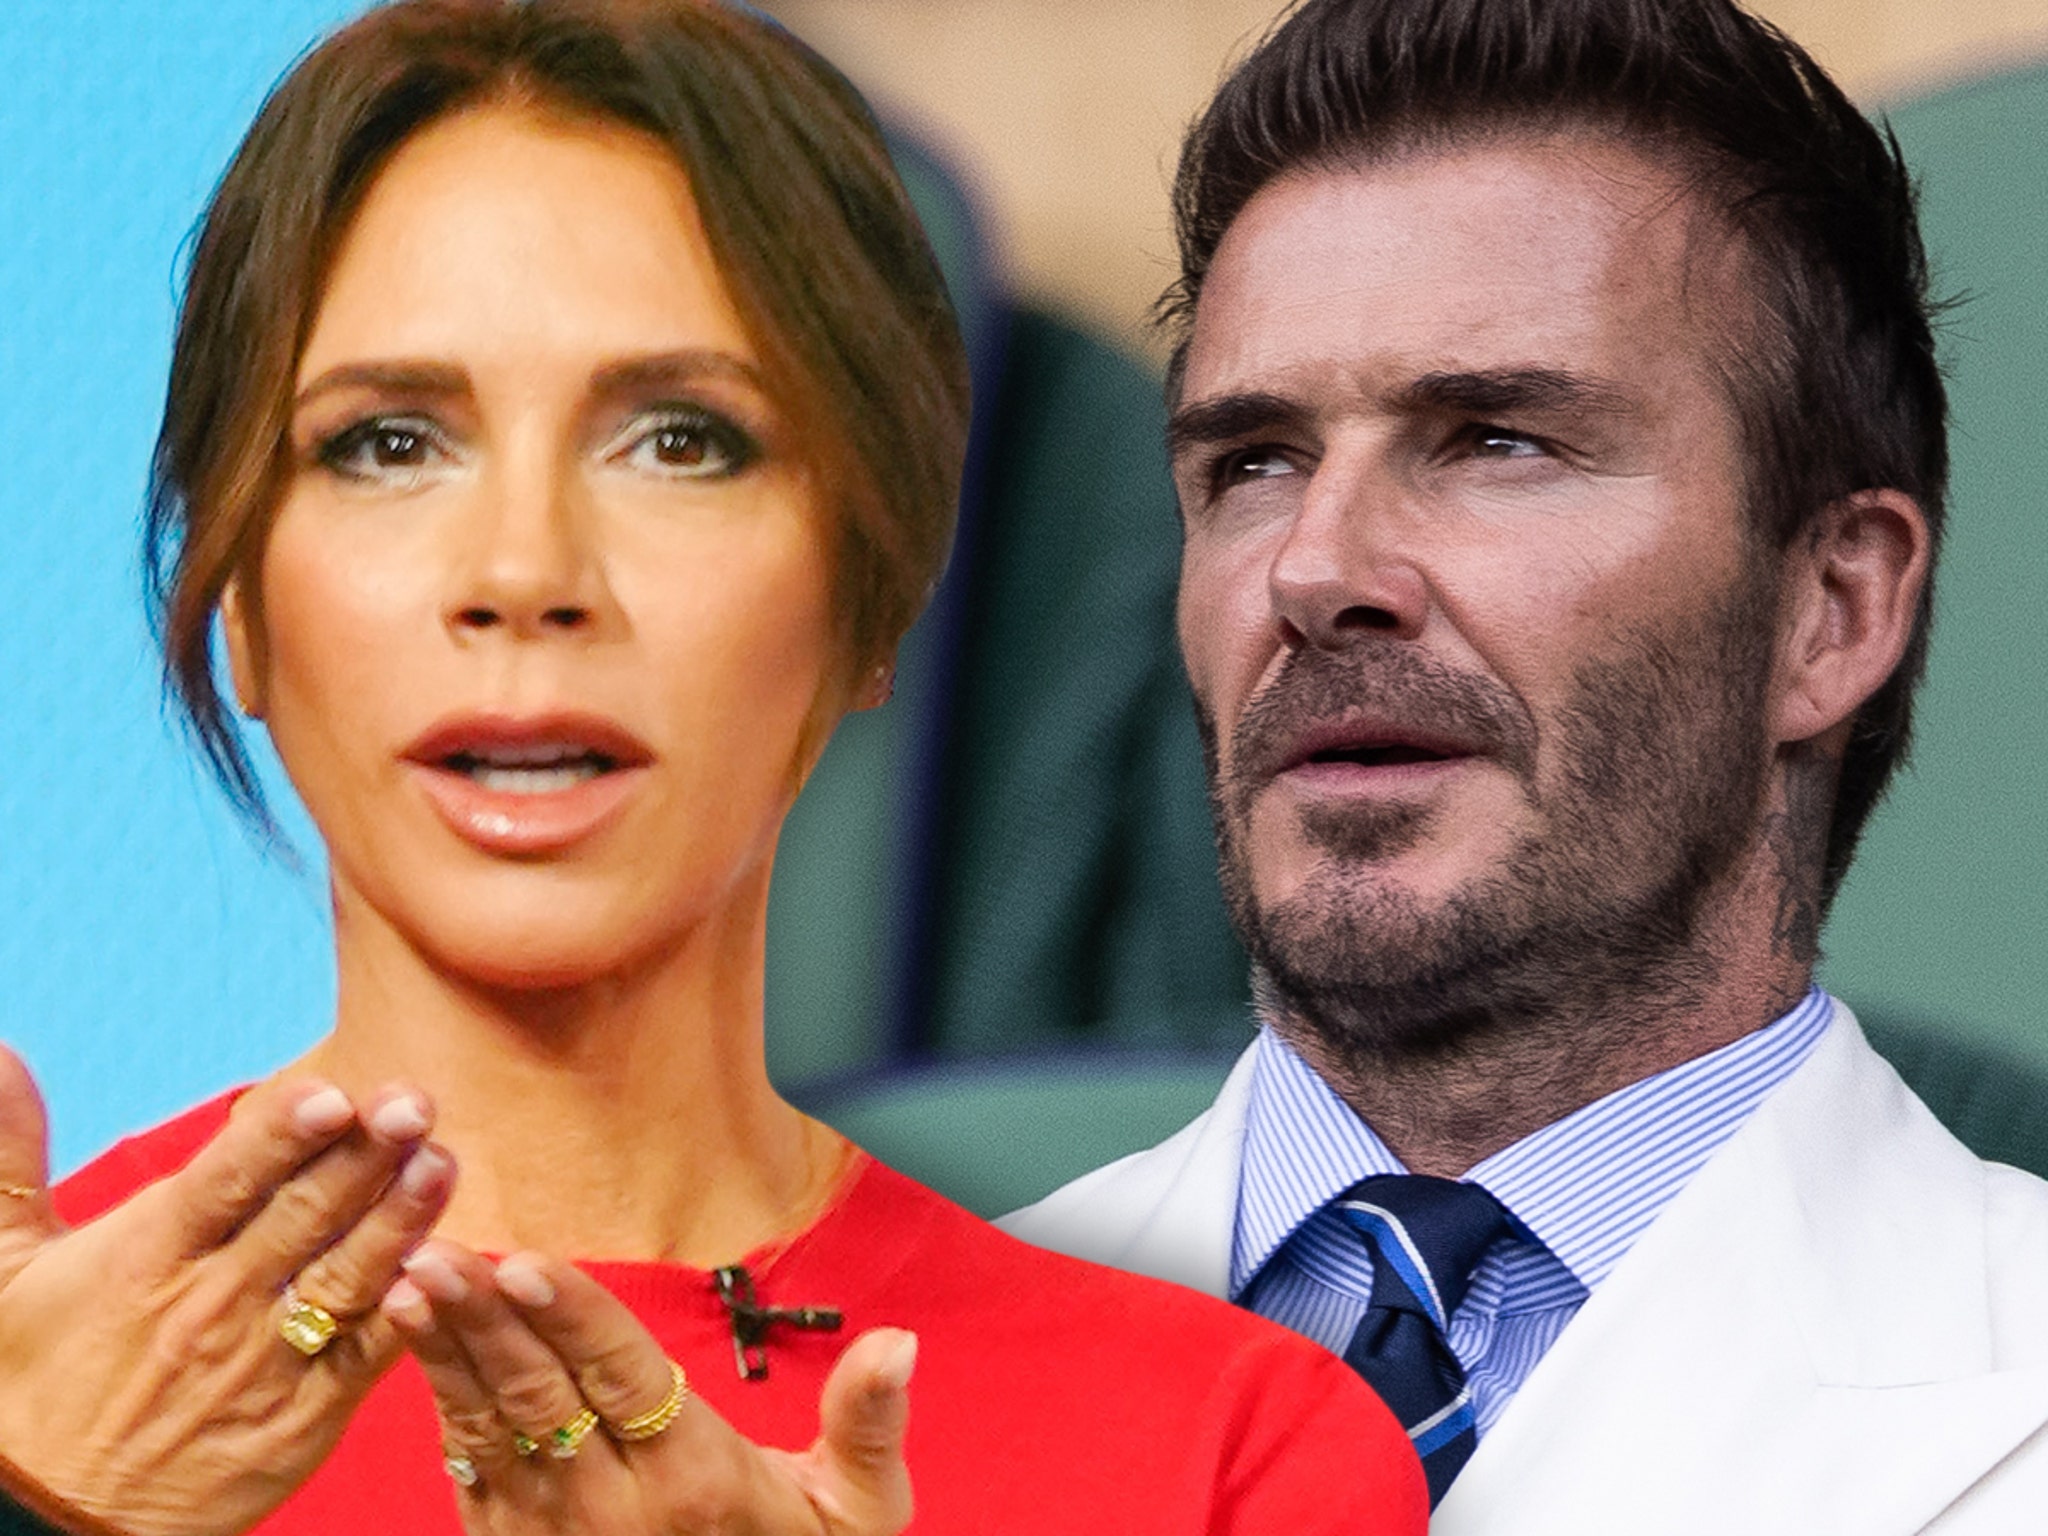 Victoria Beckham Appears to Have Removed David Beckham Initials Tattoo